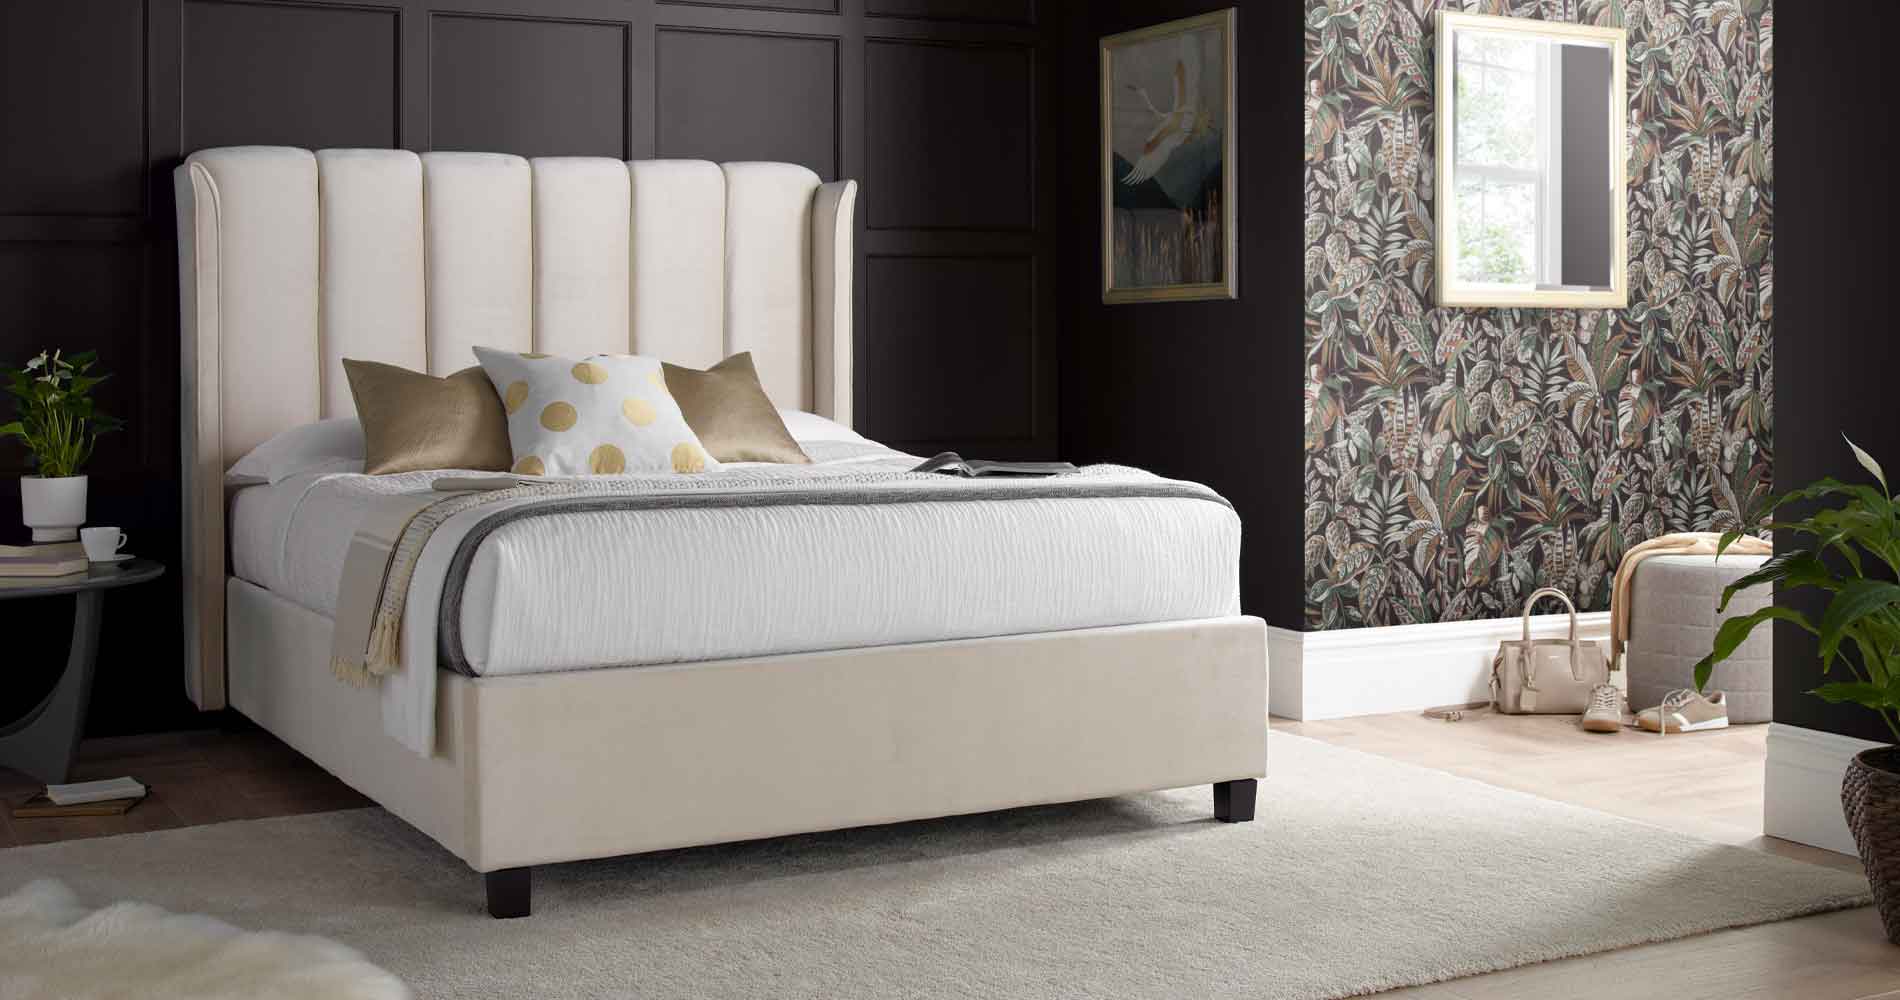 Fabric & Upholstered Beds